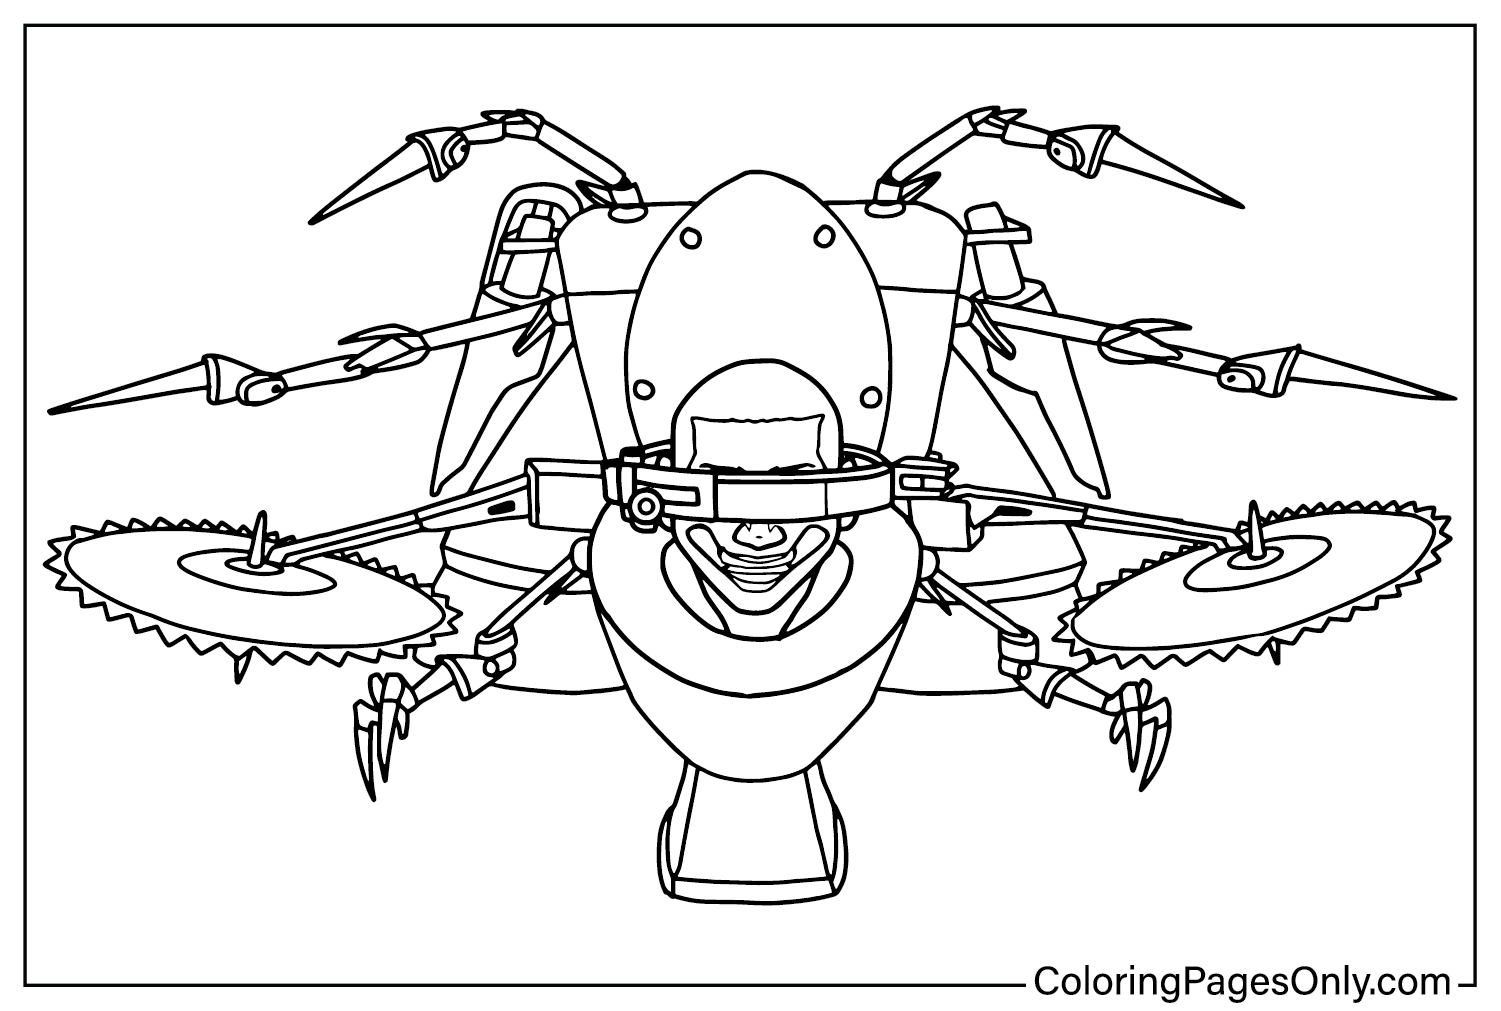 Dual Buzzsaw Mutant Coloring Page to Print from Dual Buzzsaw Mutant